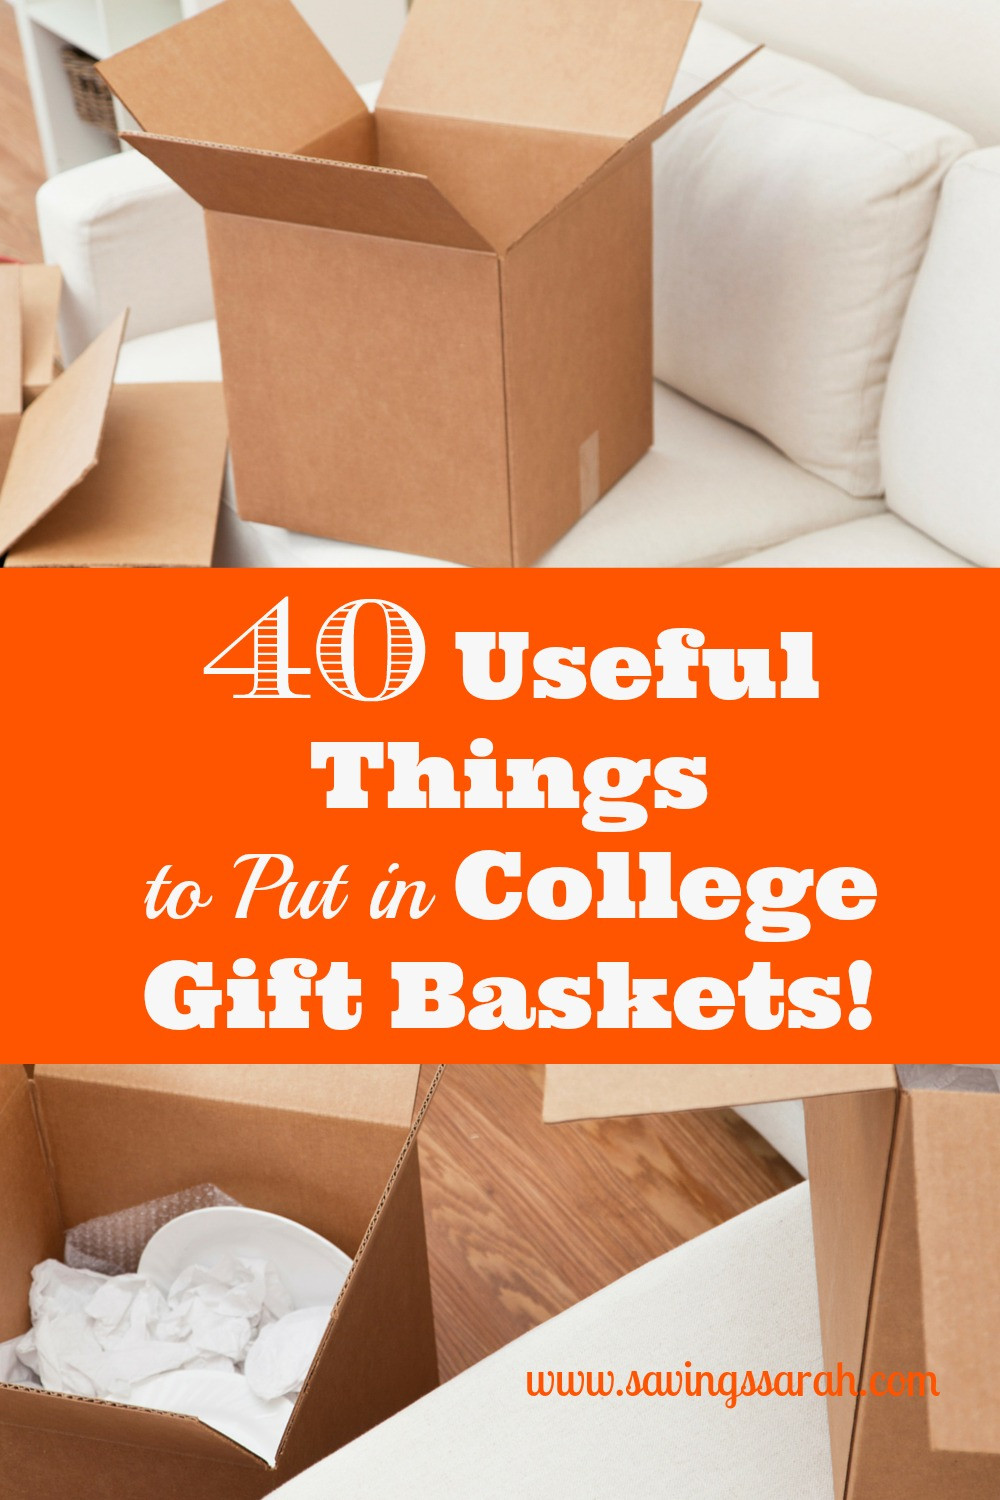 Gift Baskets For College Students Ideas
 40 Useful Things to Put in College Gift Baskets Earning